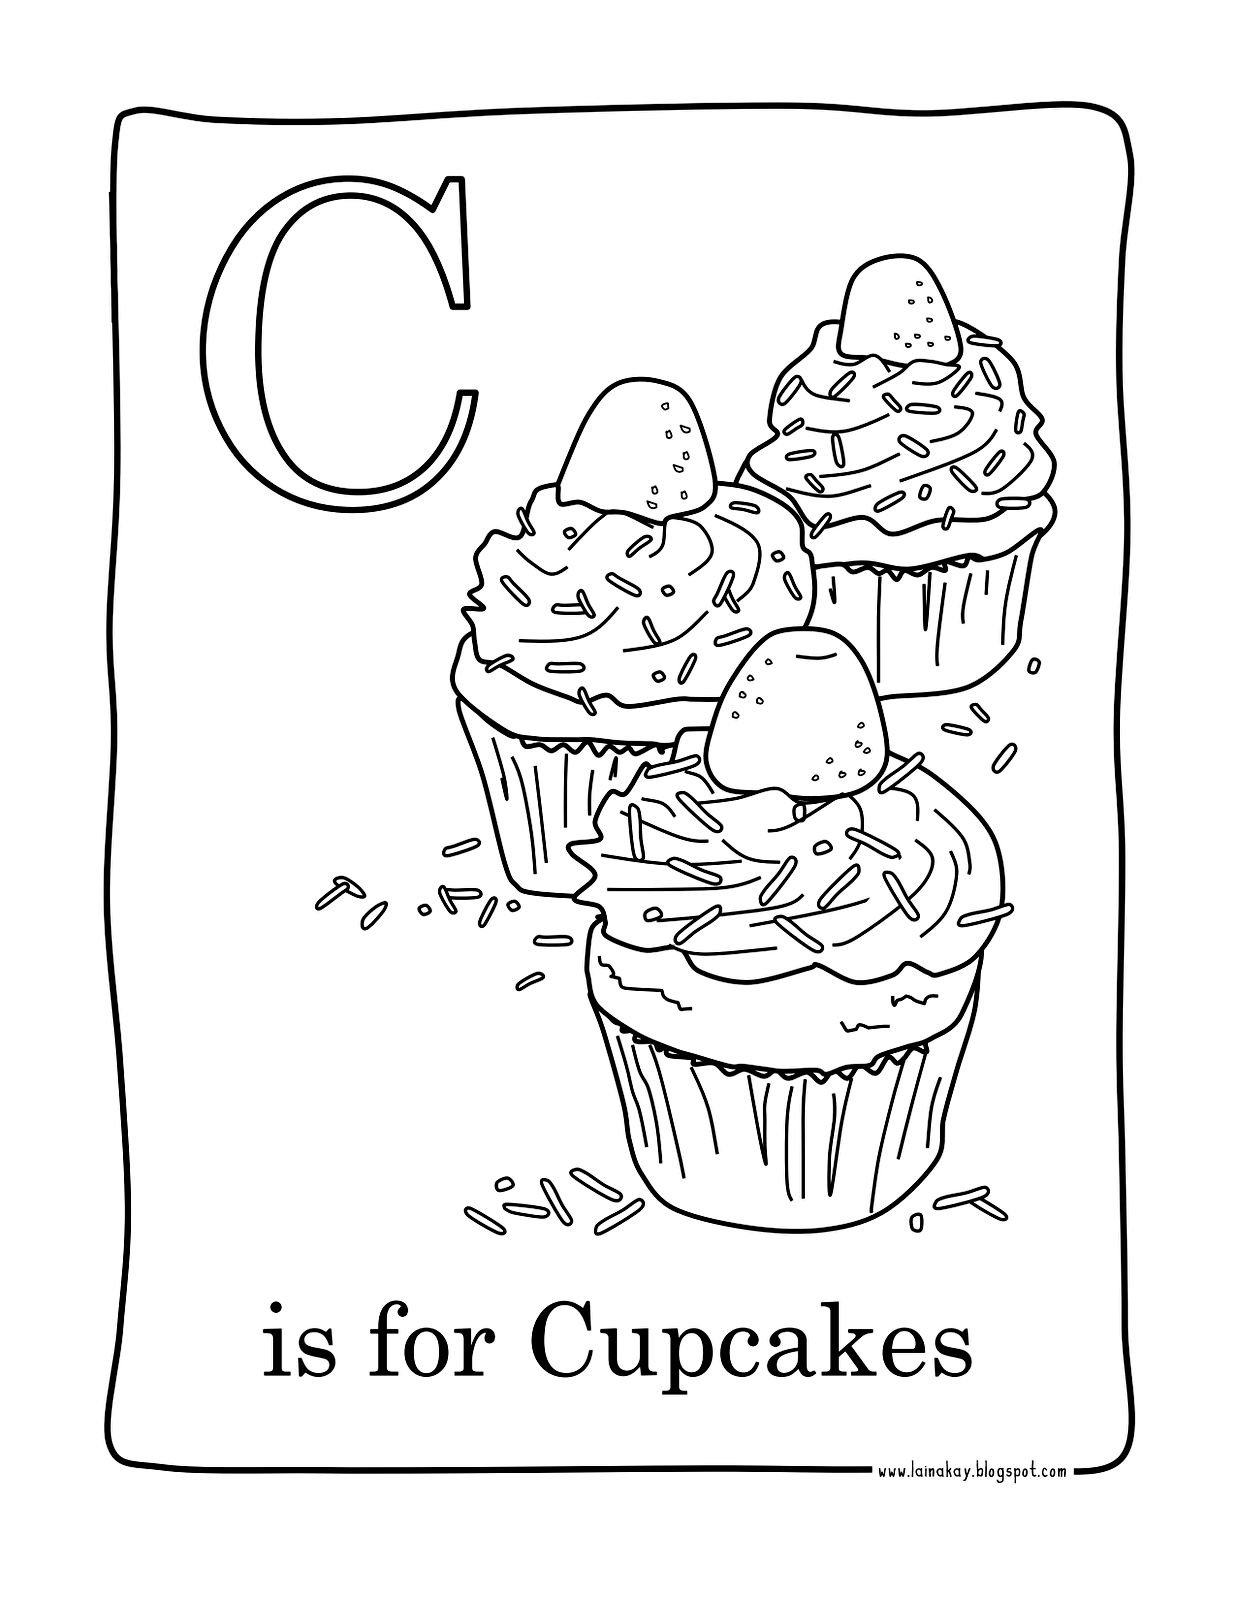 C for Cupcakes - Cupcakes Adult Coloring Pages